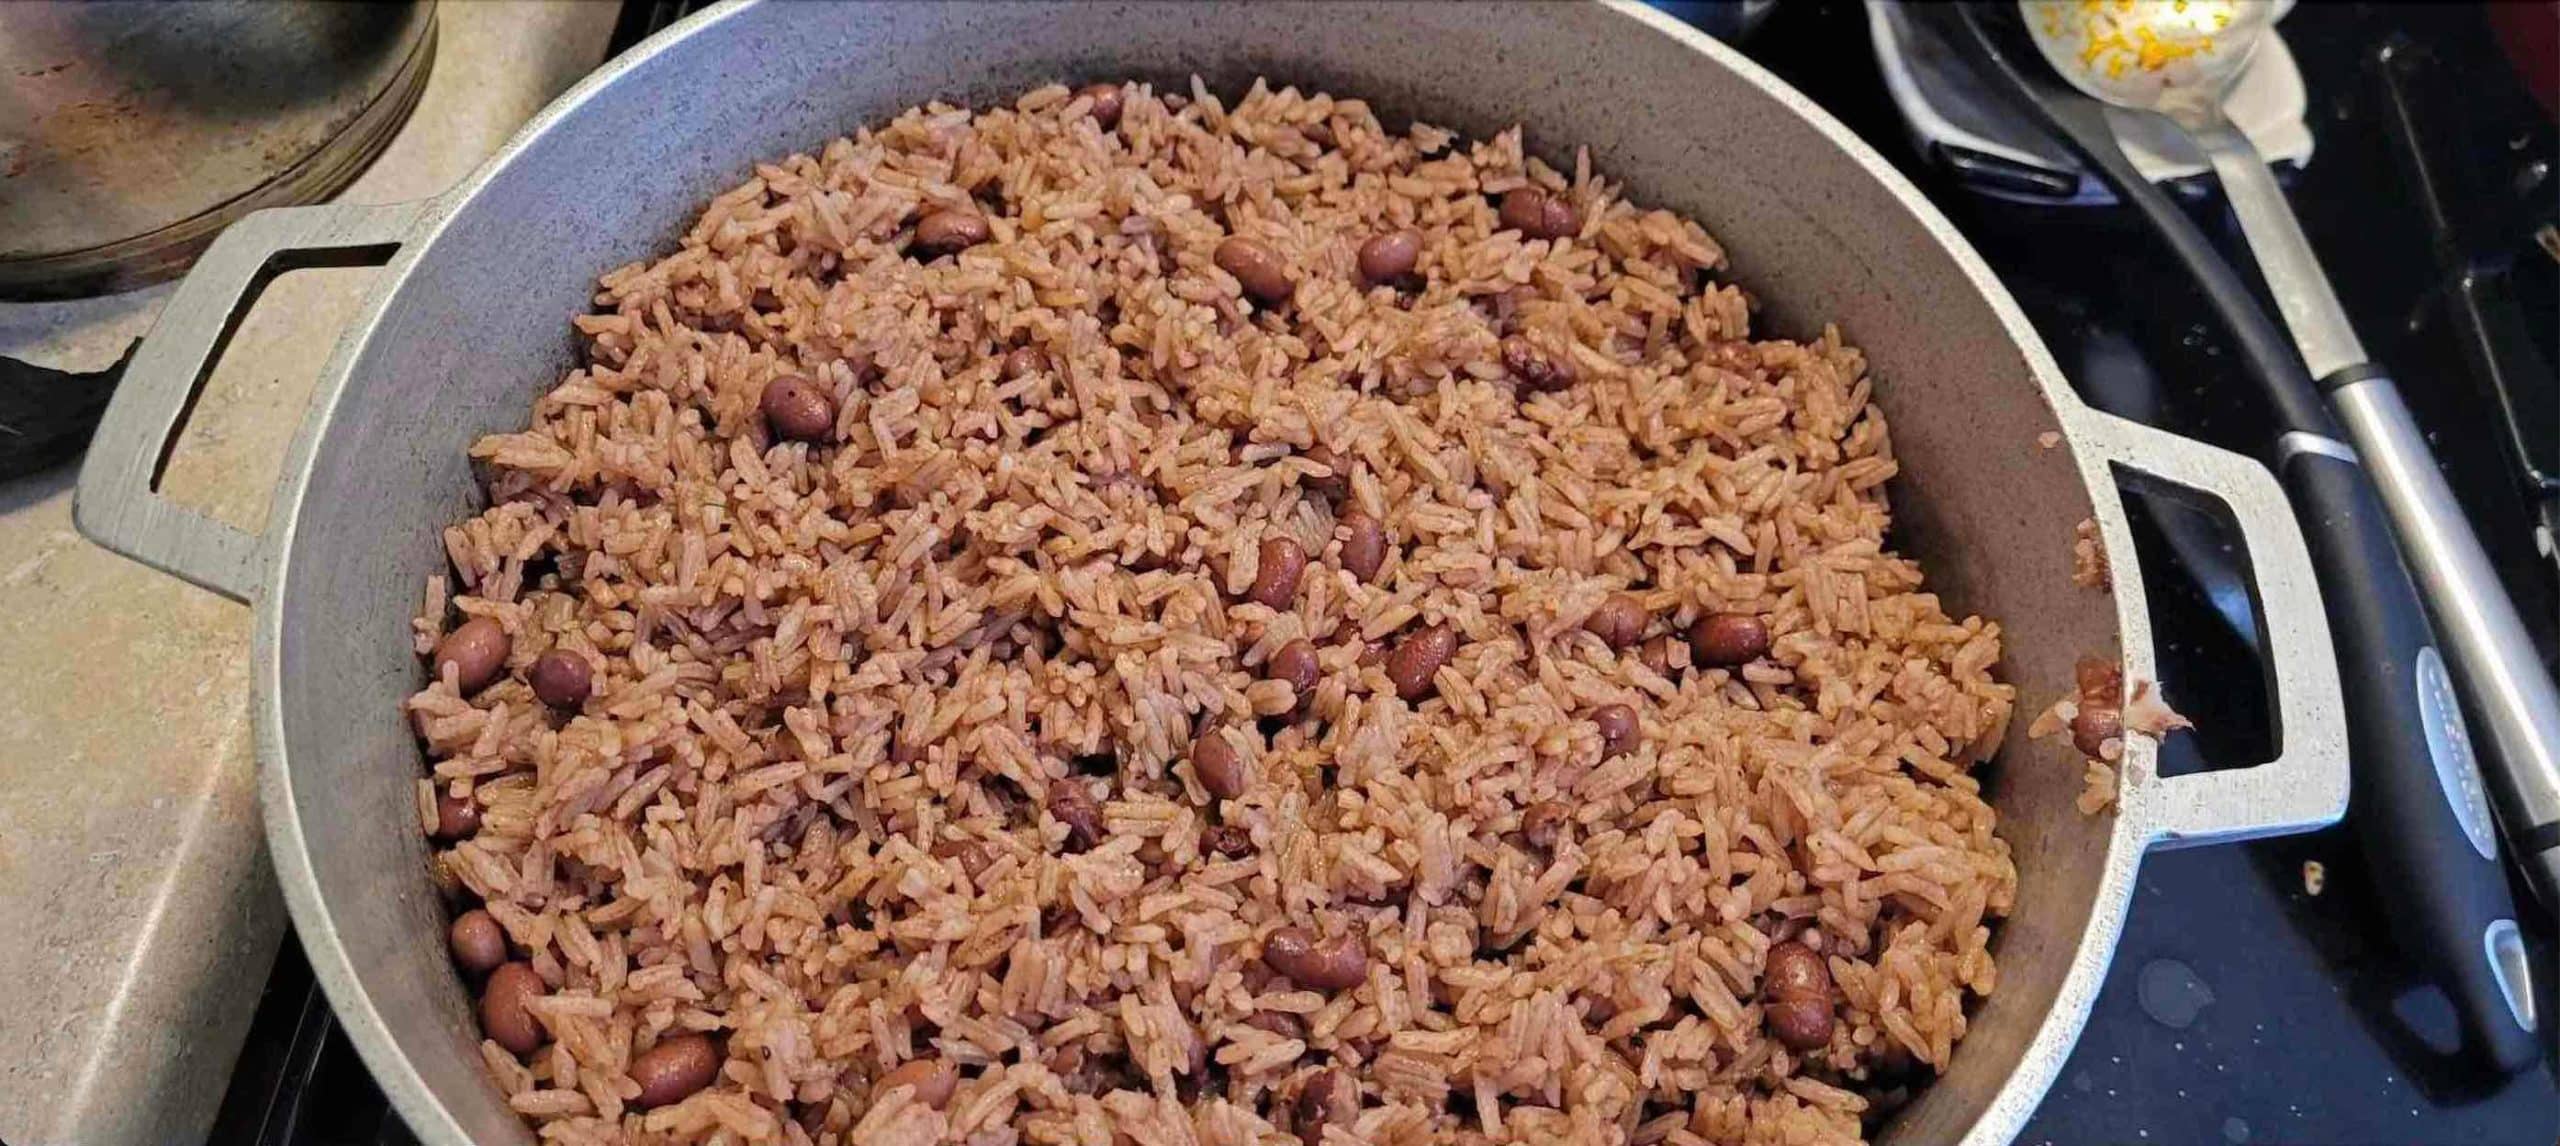 Belize Red Beans And Rice A Sunday